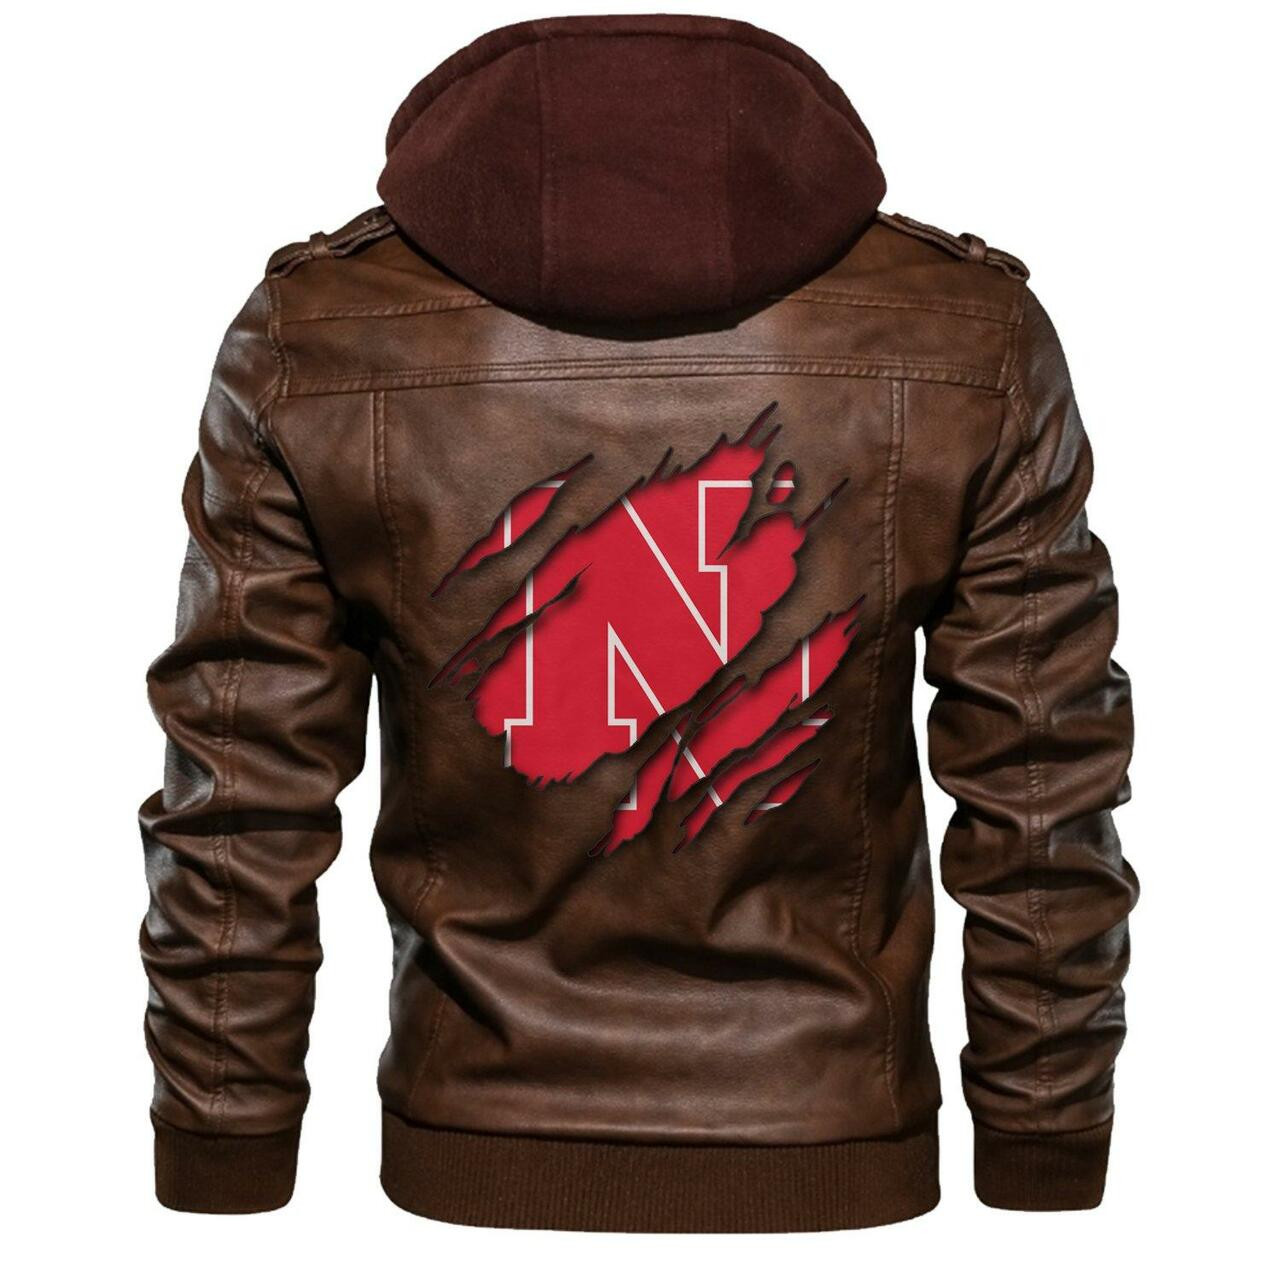 This leather Jacket will look great on you and make you stand out from the crowd 5